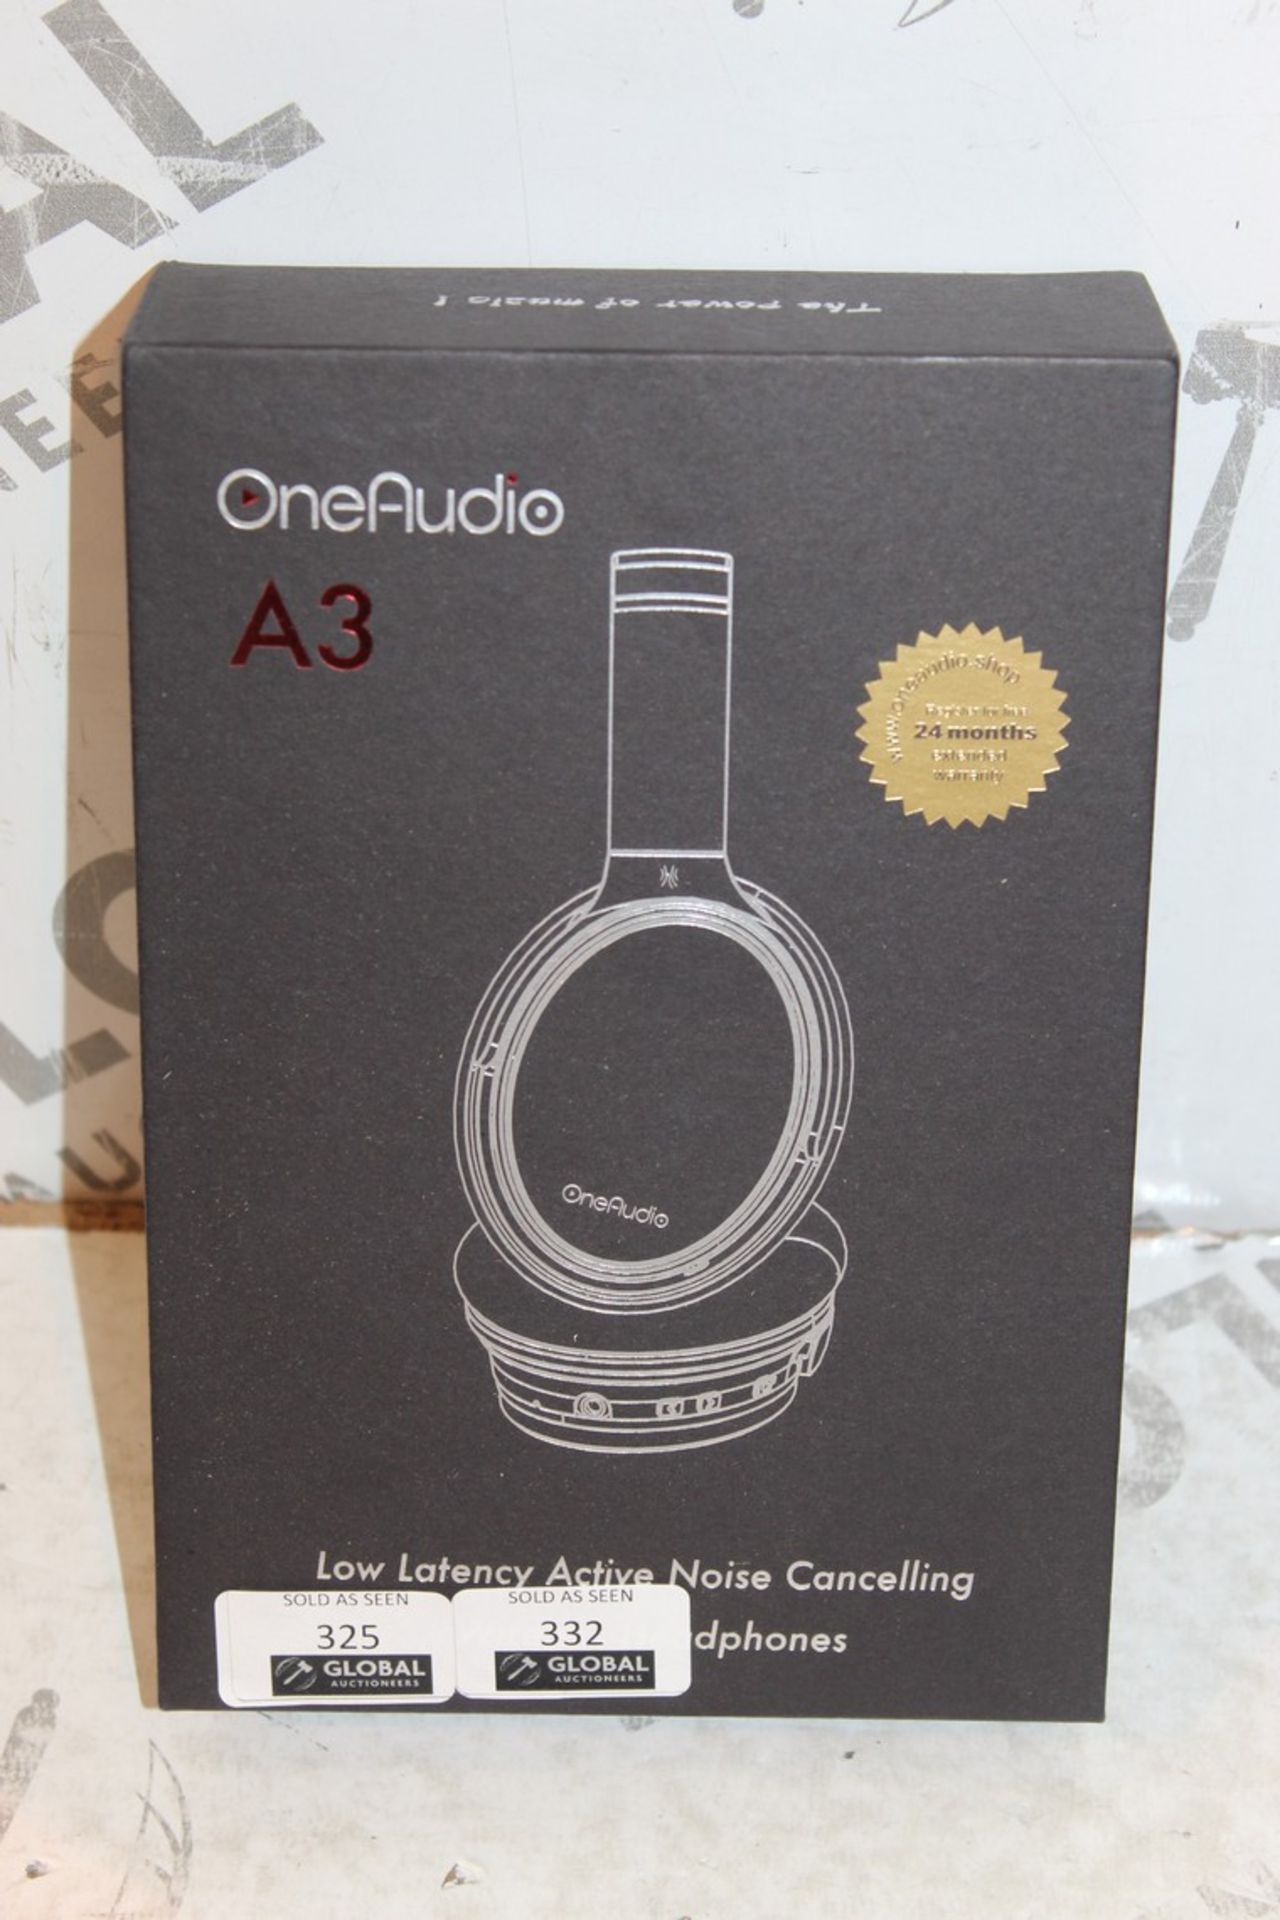 Boxed Pair One Audio A3 Low Latency Active Noise Cancelling Wireless Headphones RRP £55 (Pictures